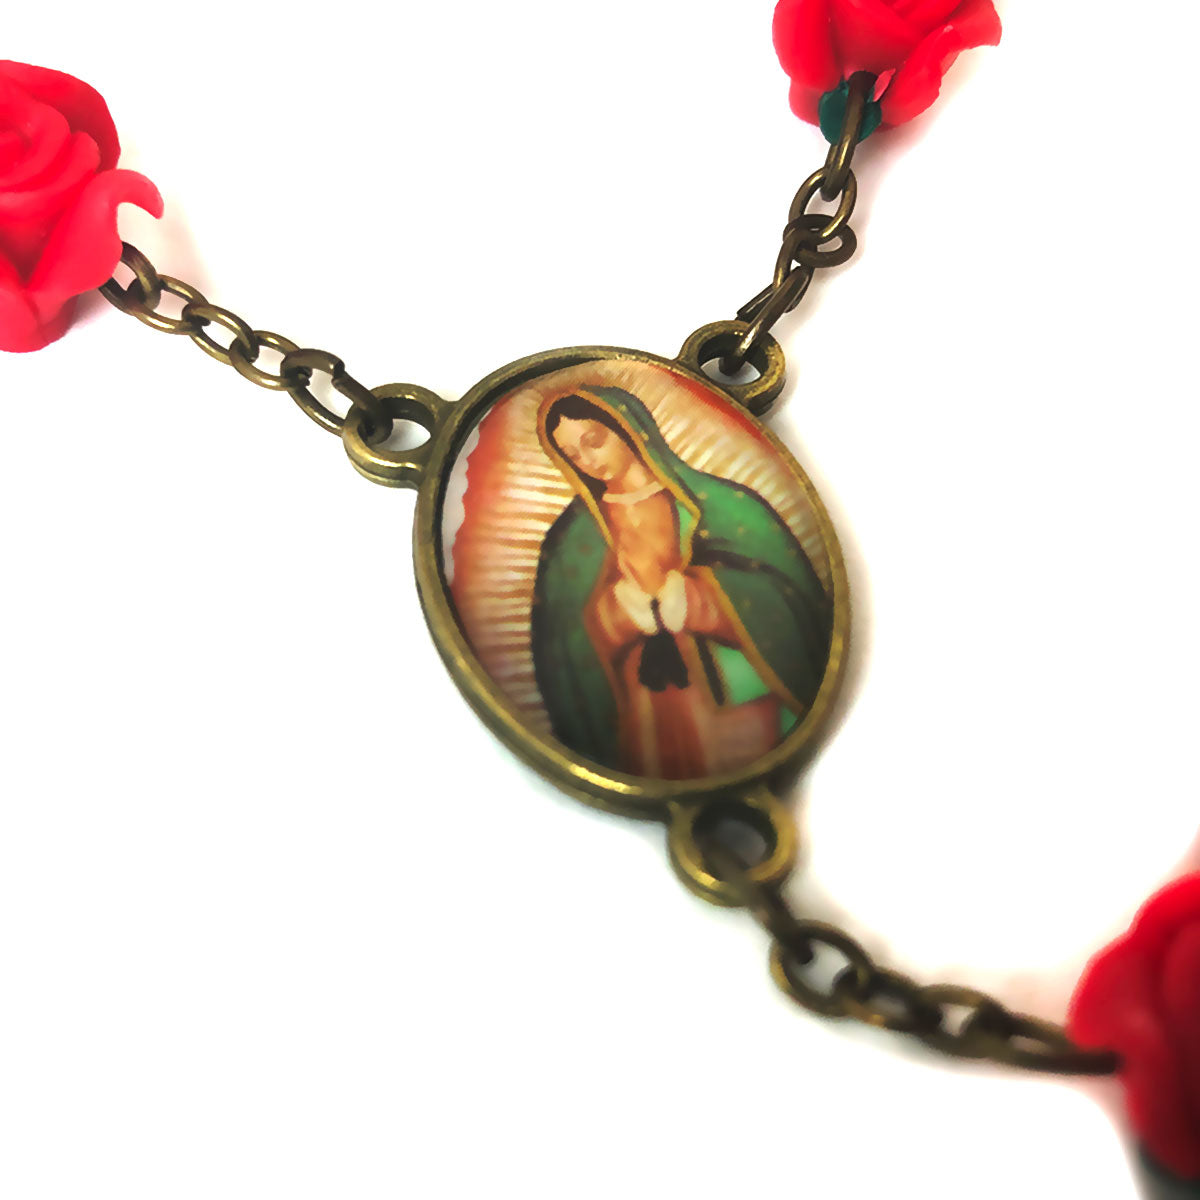 Our Lady of Guadalupe Red Rose Garden Rosary in Antique Bronze Finish with Velvet Rosary Pouch - Deluxe Boxed